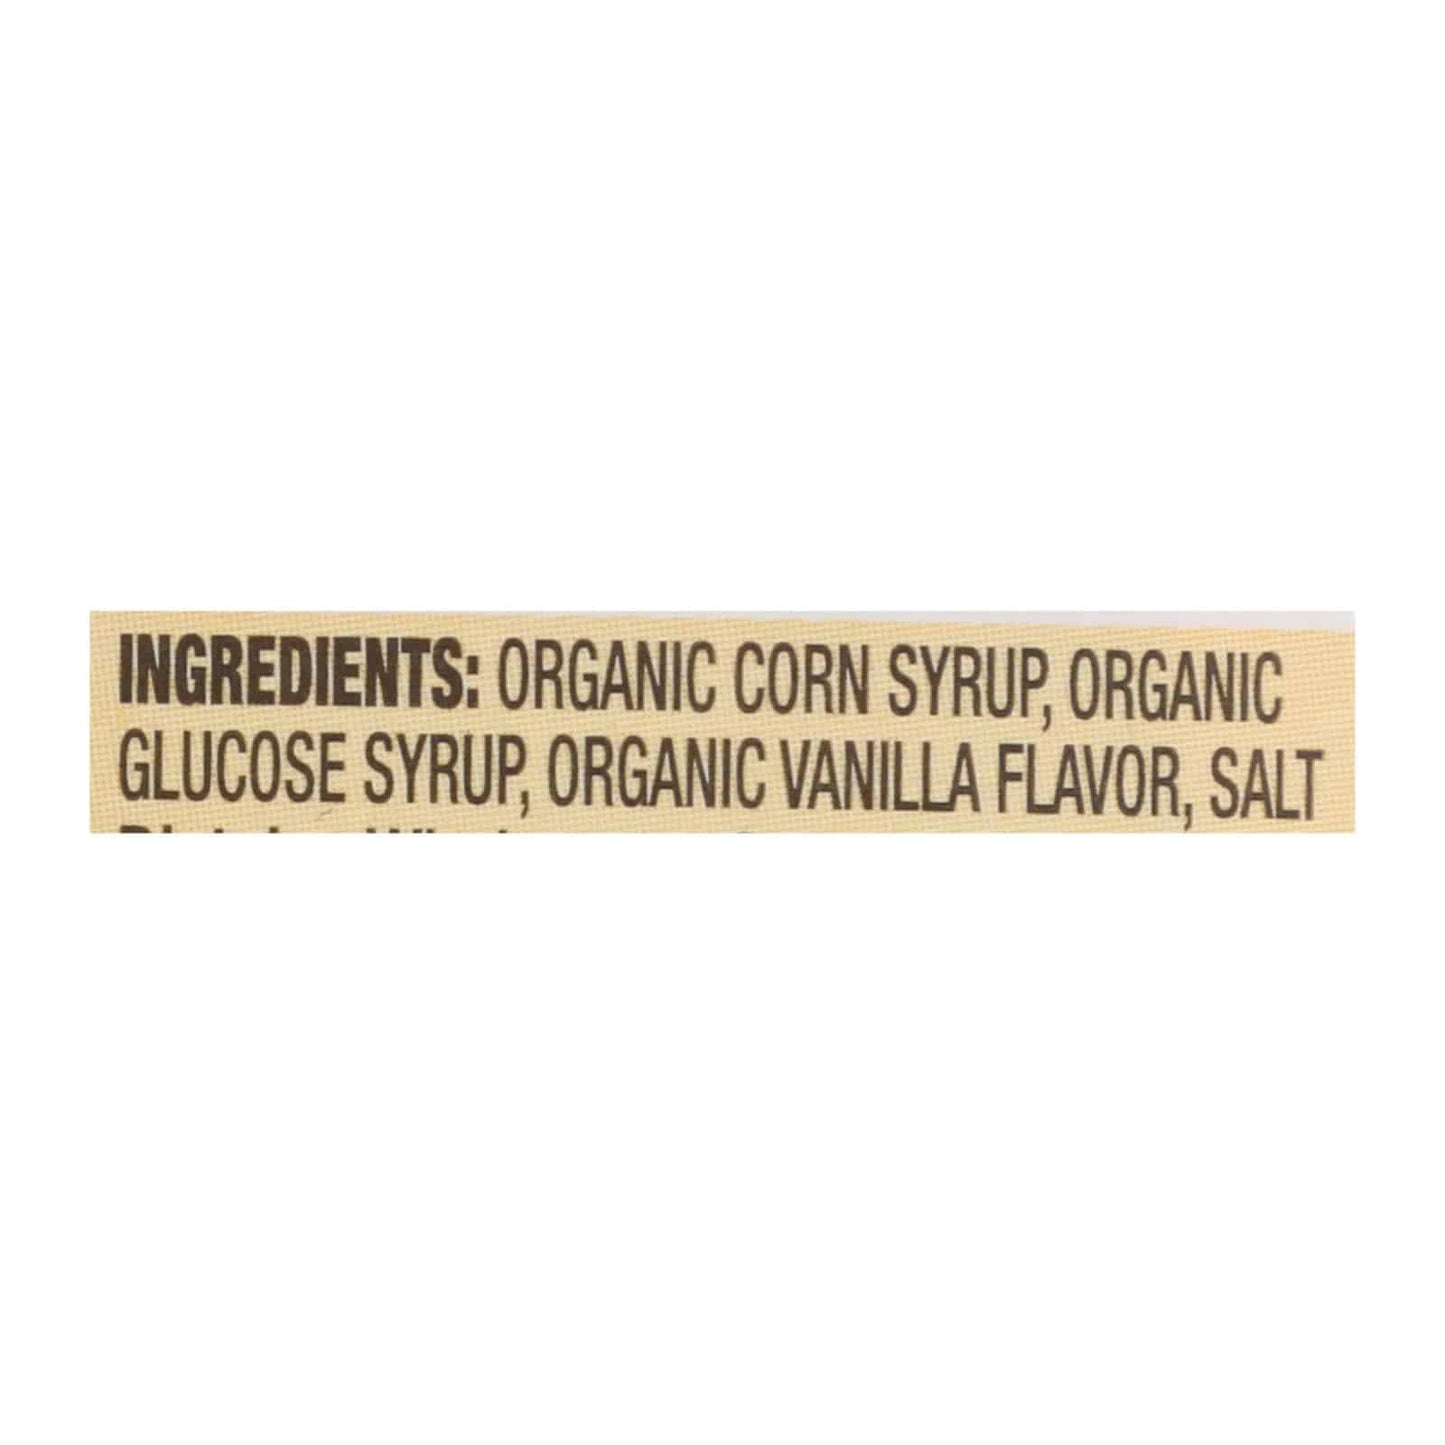 Buy Wholesome Sweeteners Light Corn Syrup - Liquid Sweetener - Case Of 6 - 11.2 Oz.  at OnlyNaturals.us